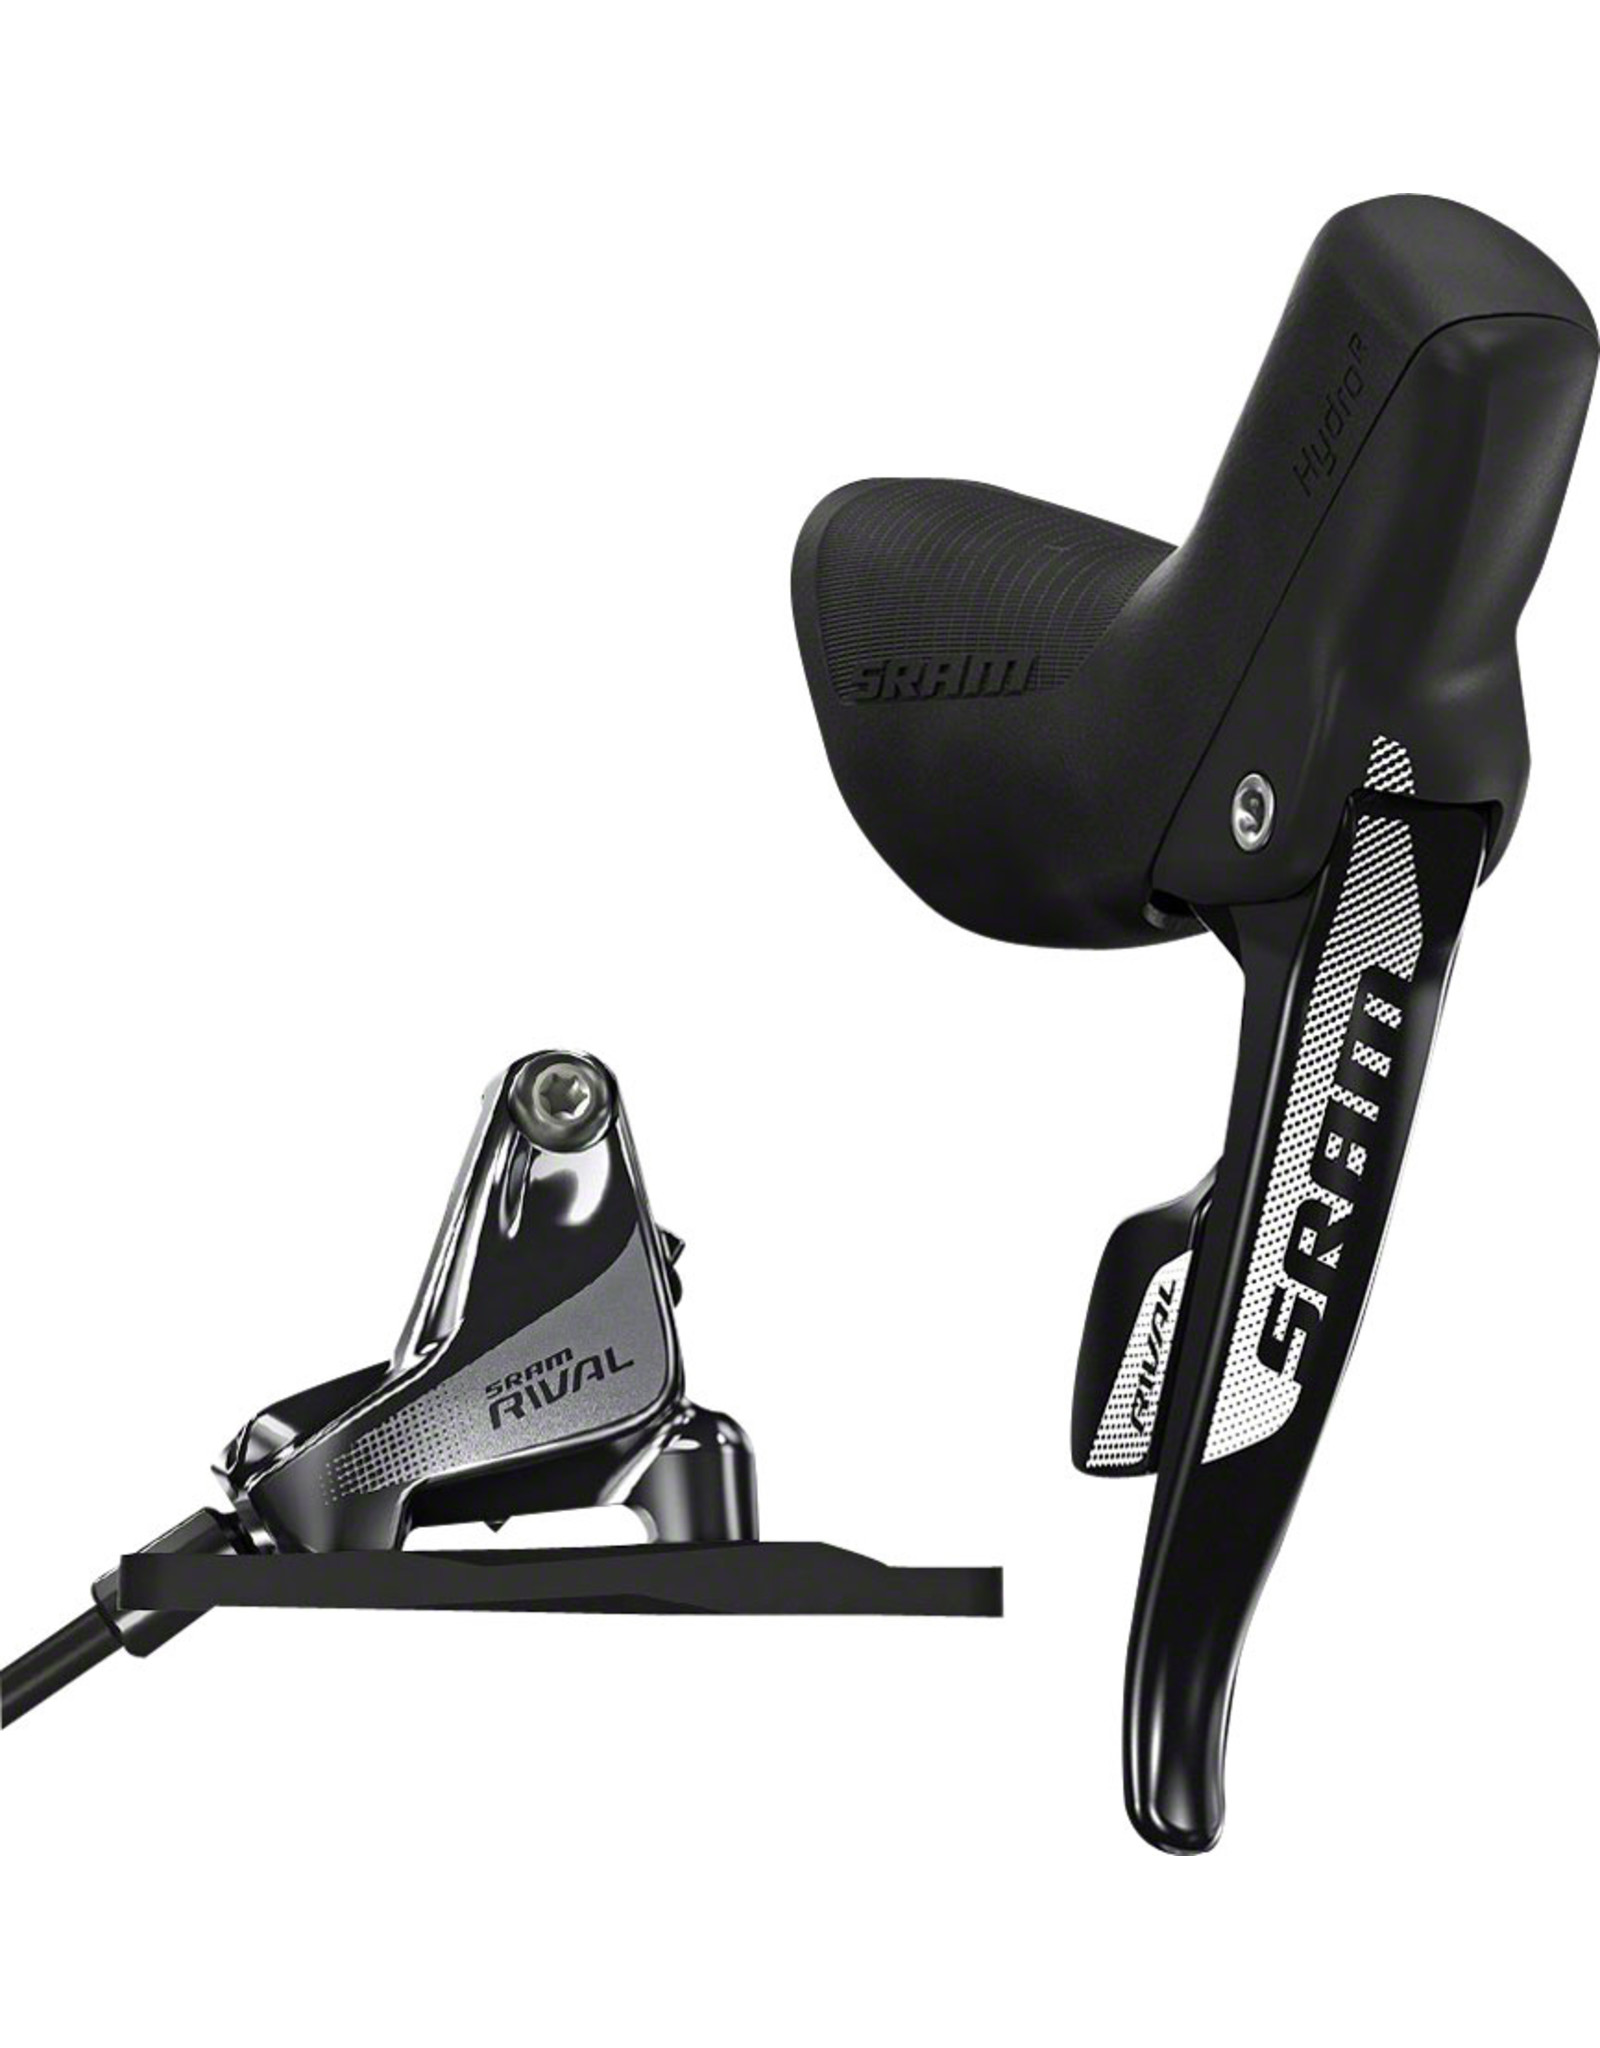 SRAM Rival 22 Flat Mount Hydraulic Disc Brake with Front Shifter and 950mm Hose, Rotor Sold Separately